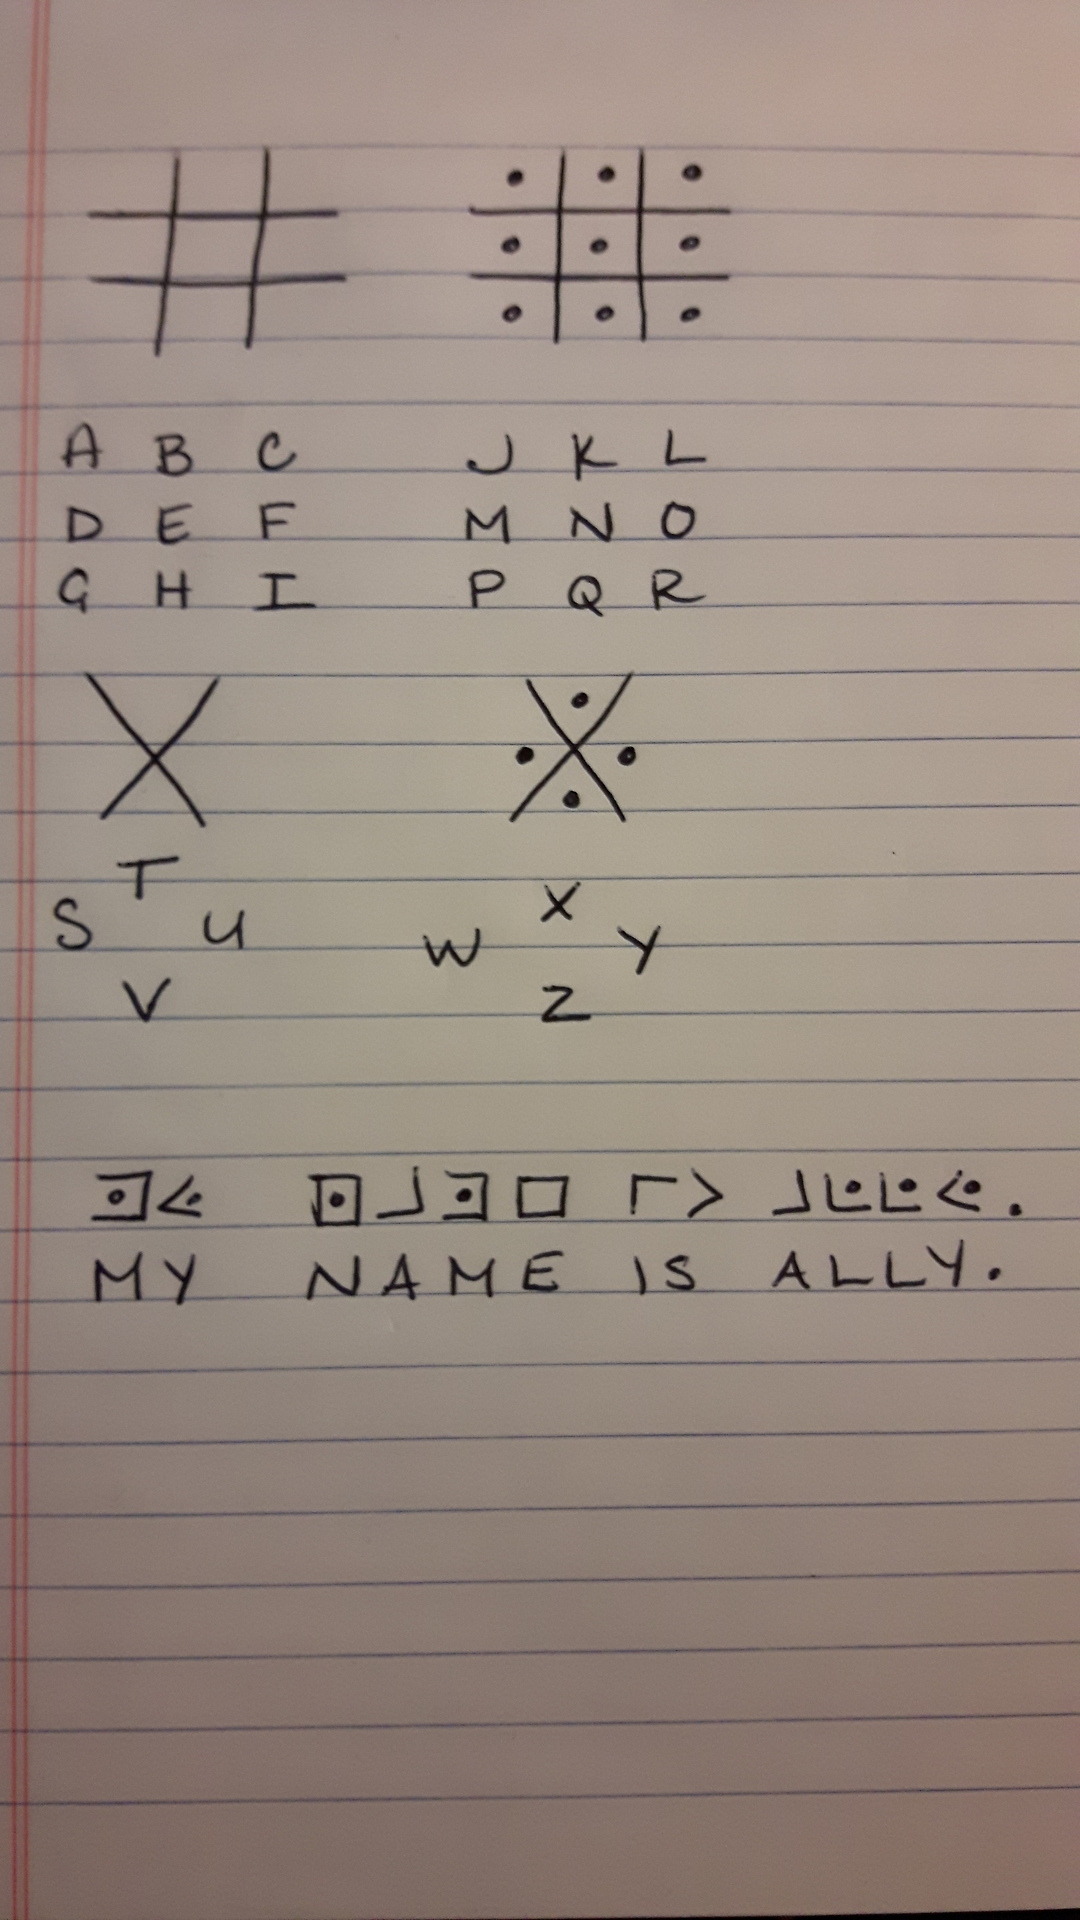 spiritofally: Back in middle school, my friends and I used a very simple coded language